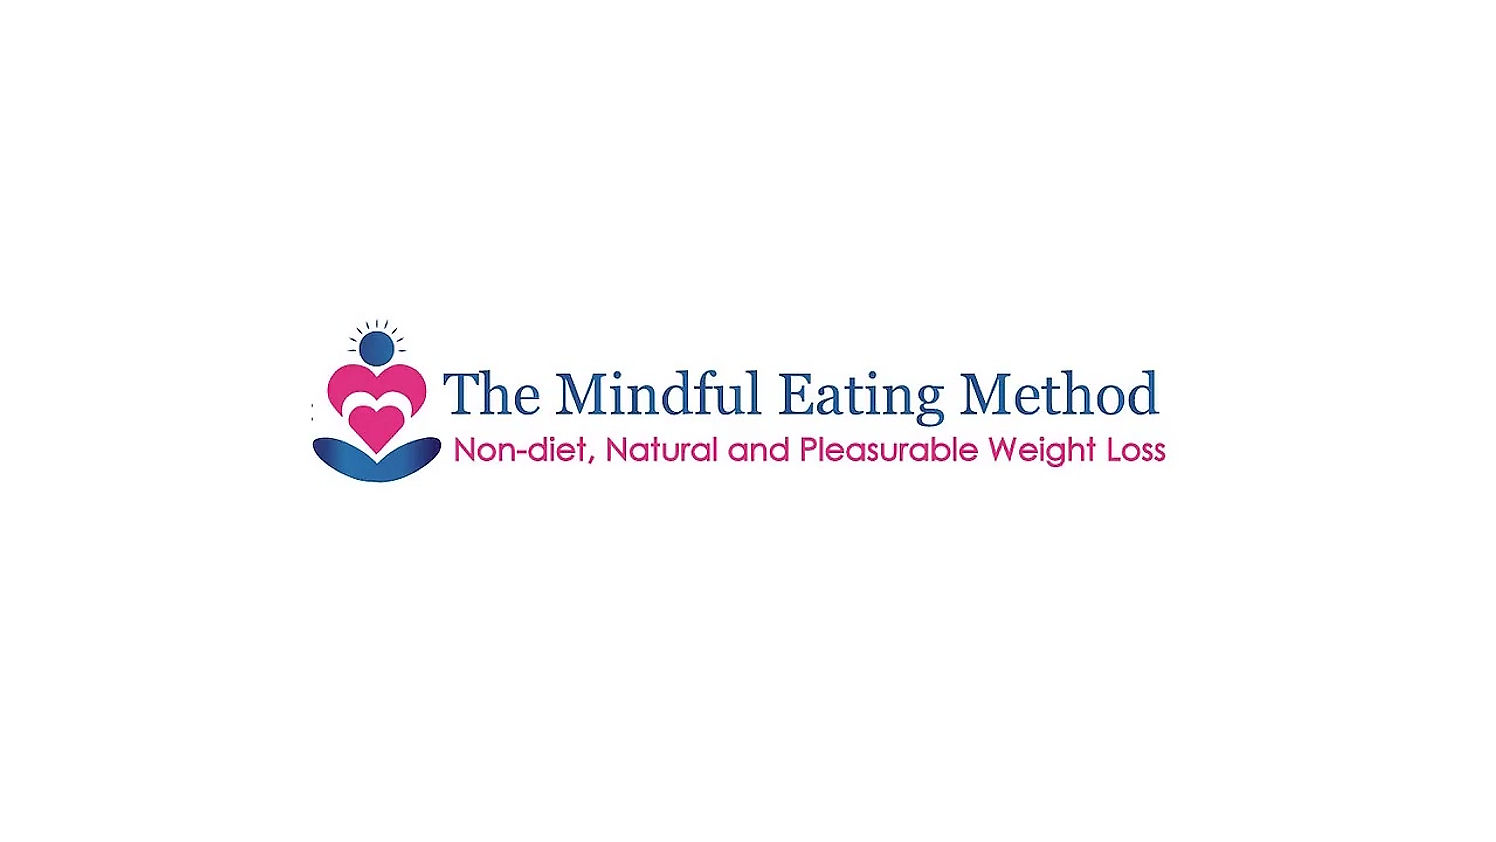 The Mindful Eating Method -   Creating A Safe Space While On The Road